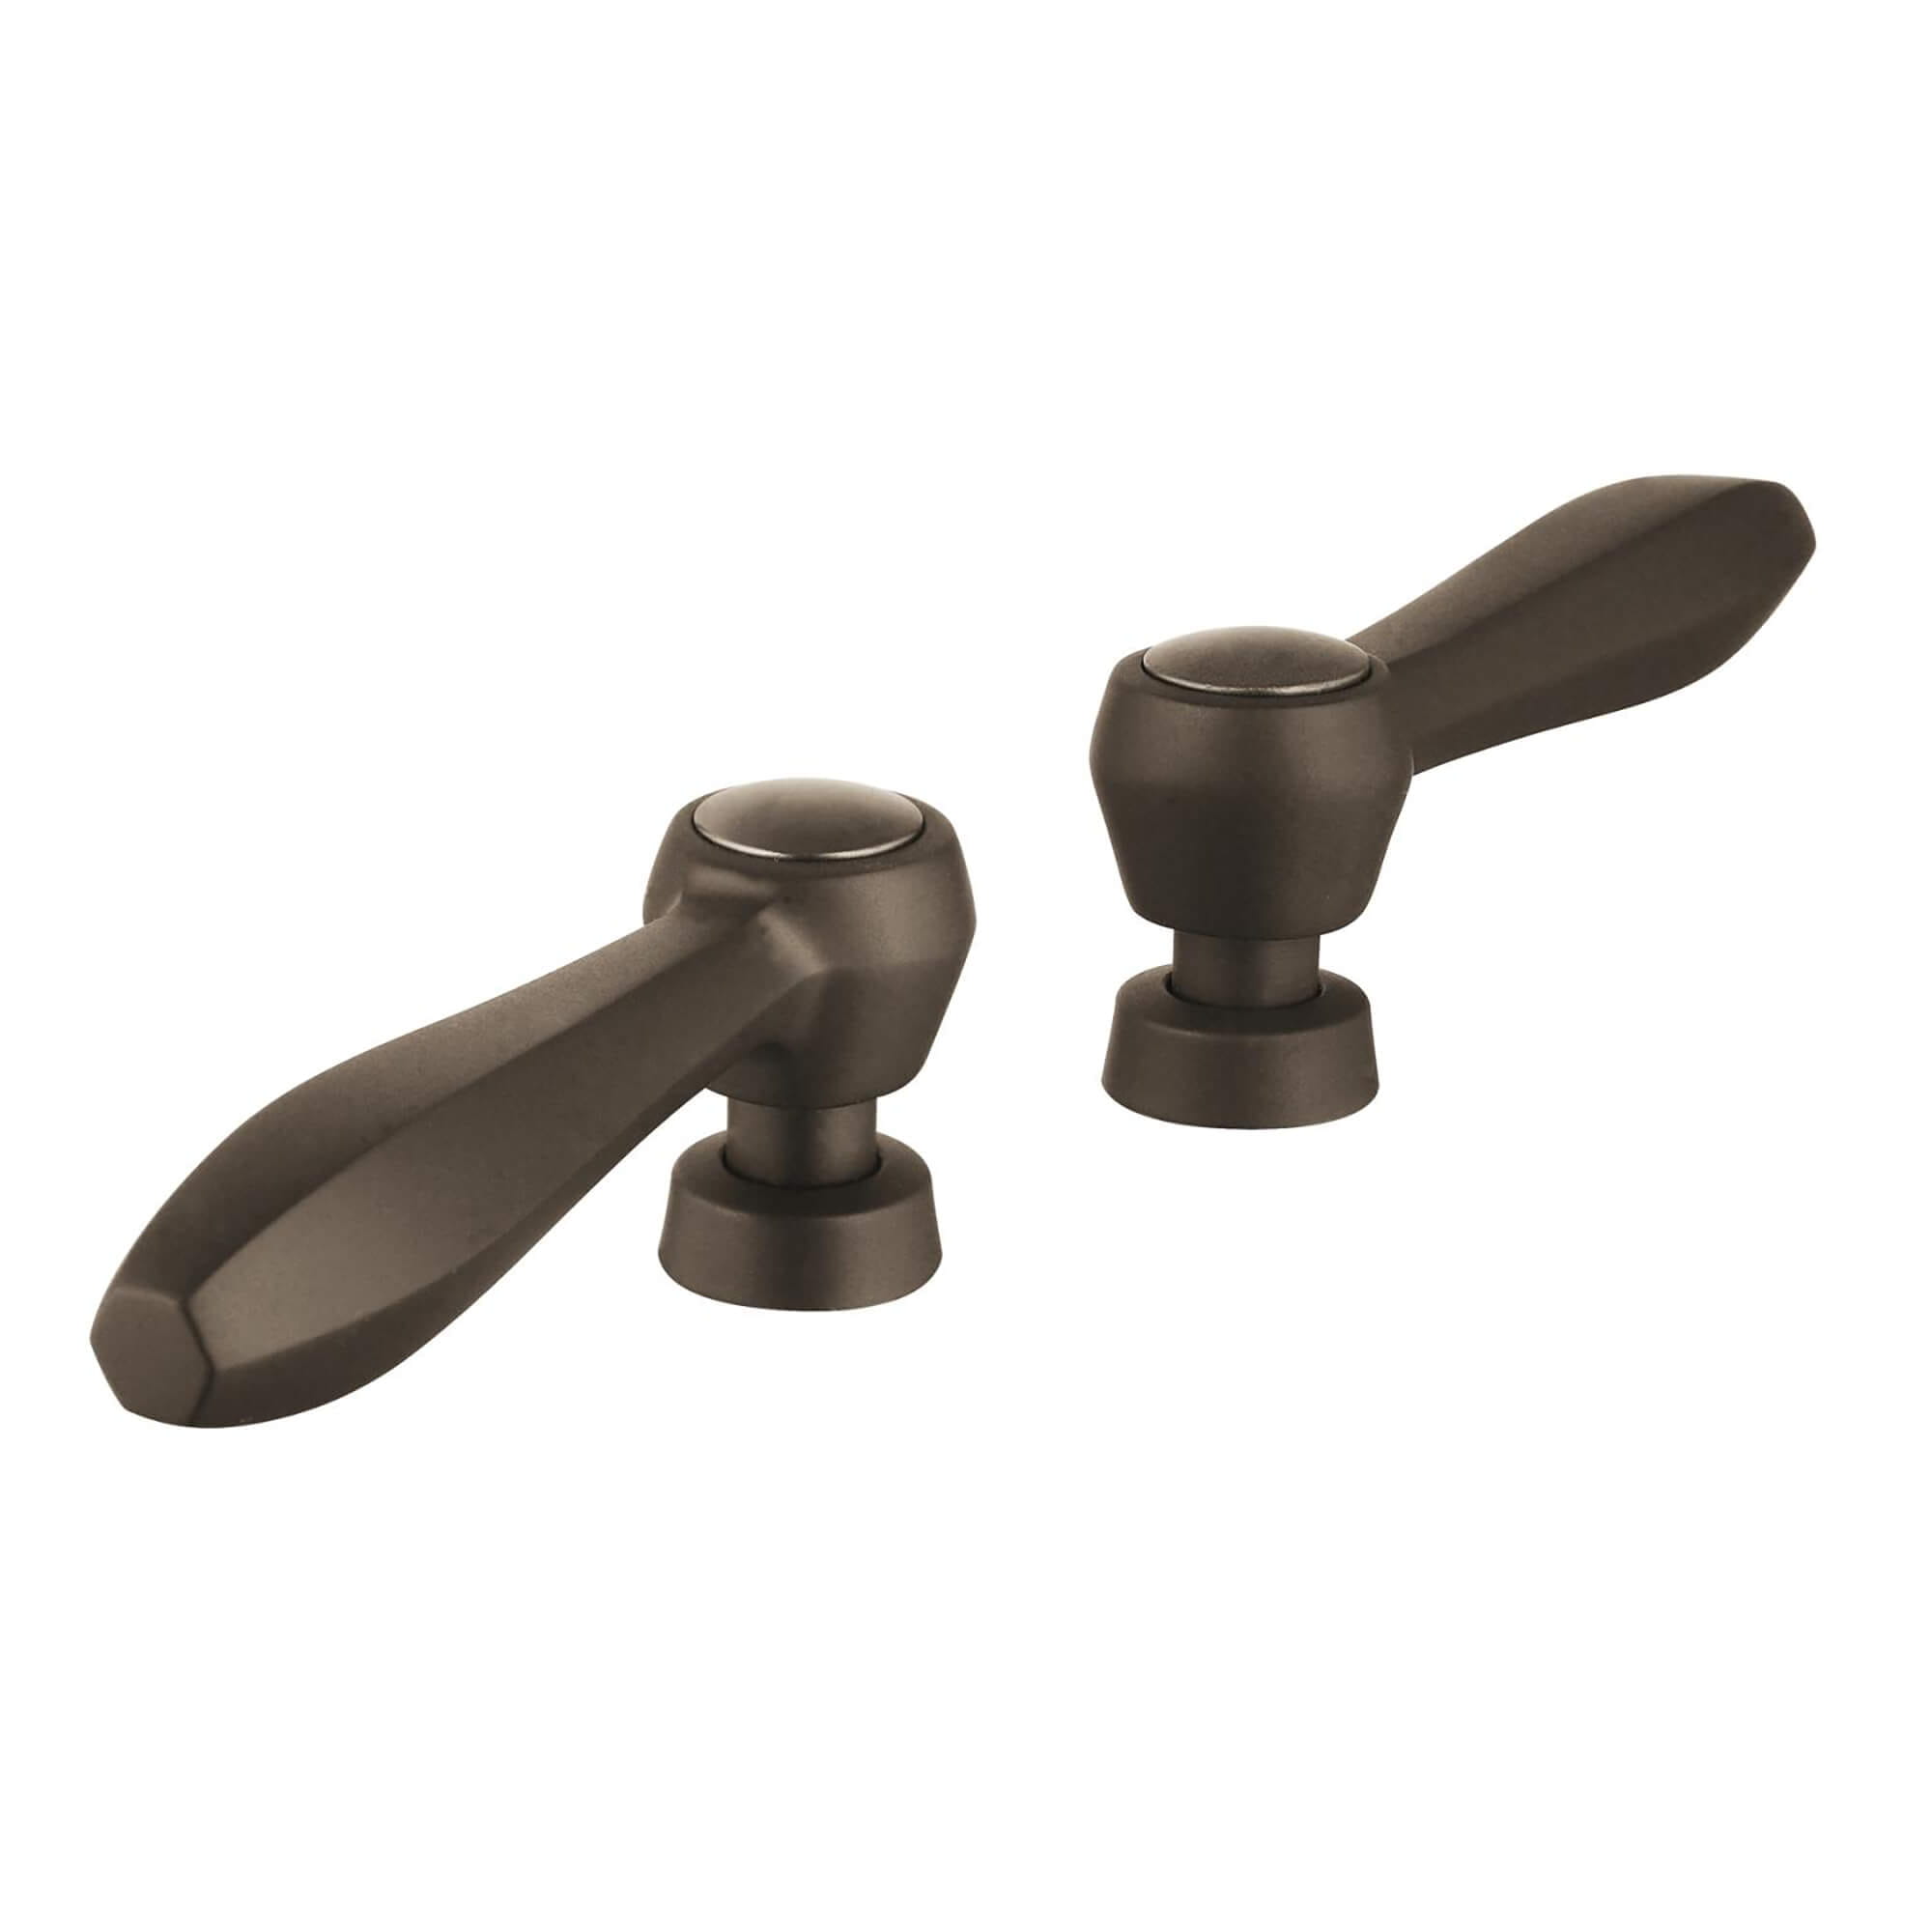 Lever Handles Pair GROHE OIL RUBBED BRONZE